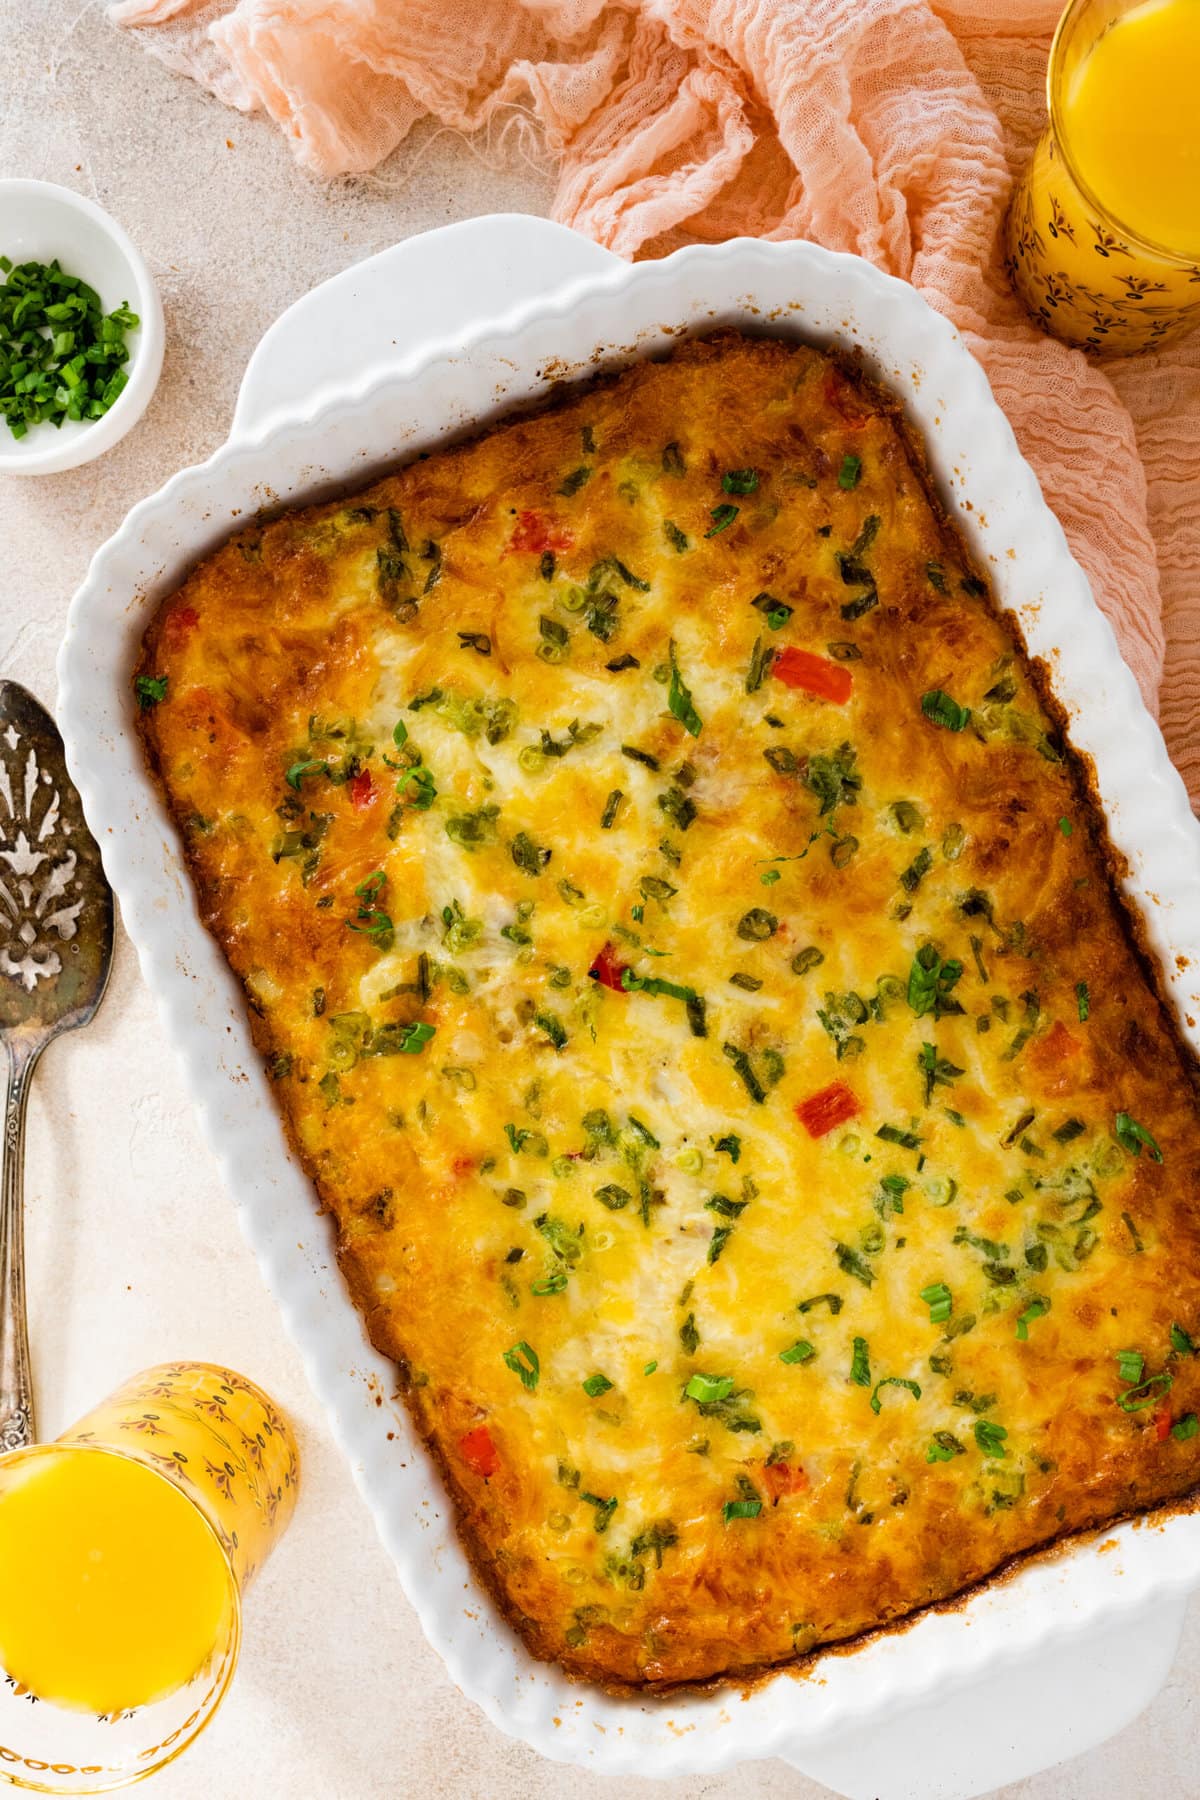 How to make breakfast casserole step-by-step: cooked casserole in a pan.